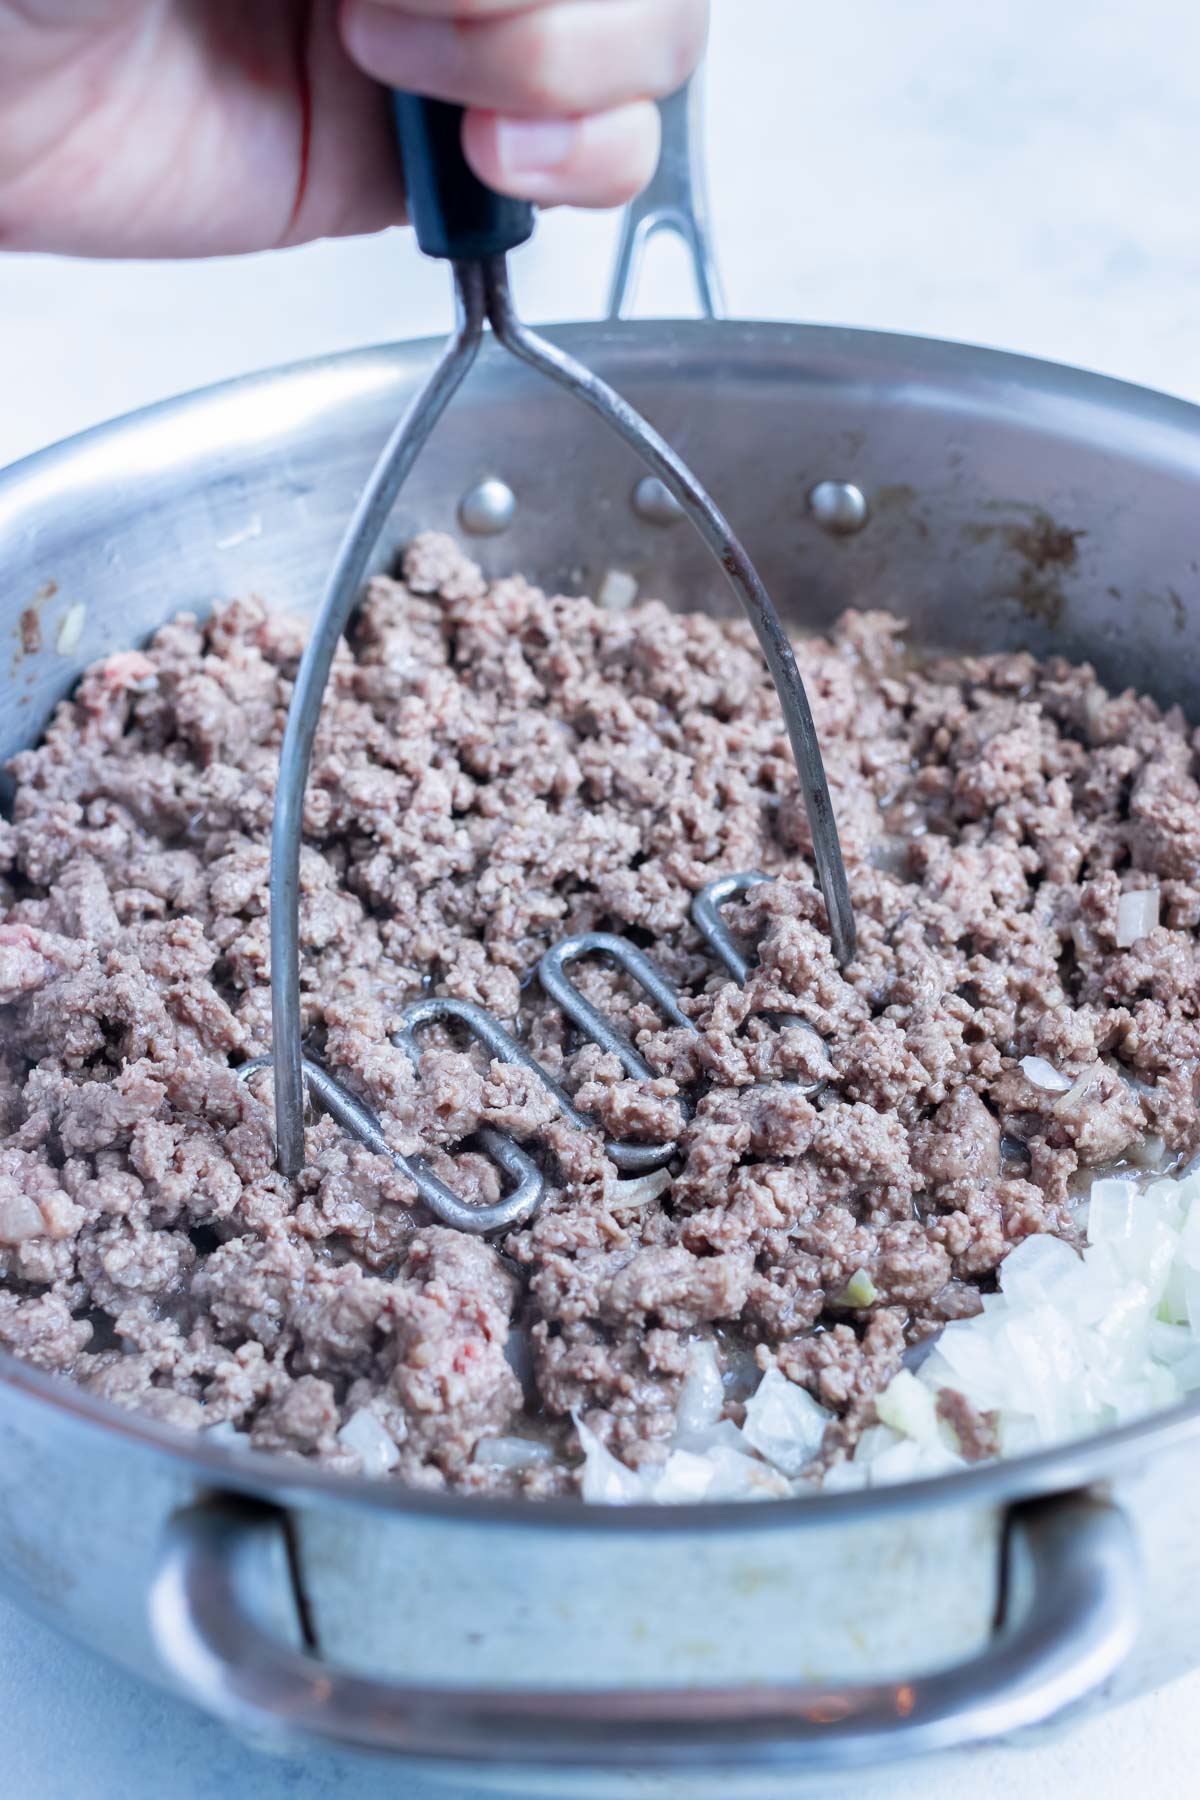 The ground meat is added to the sautéed onions.